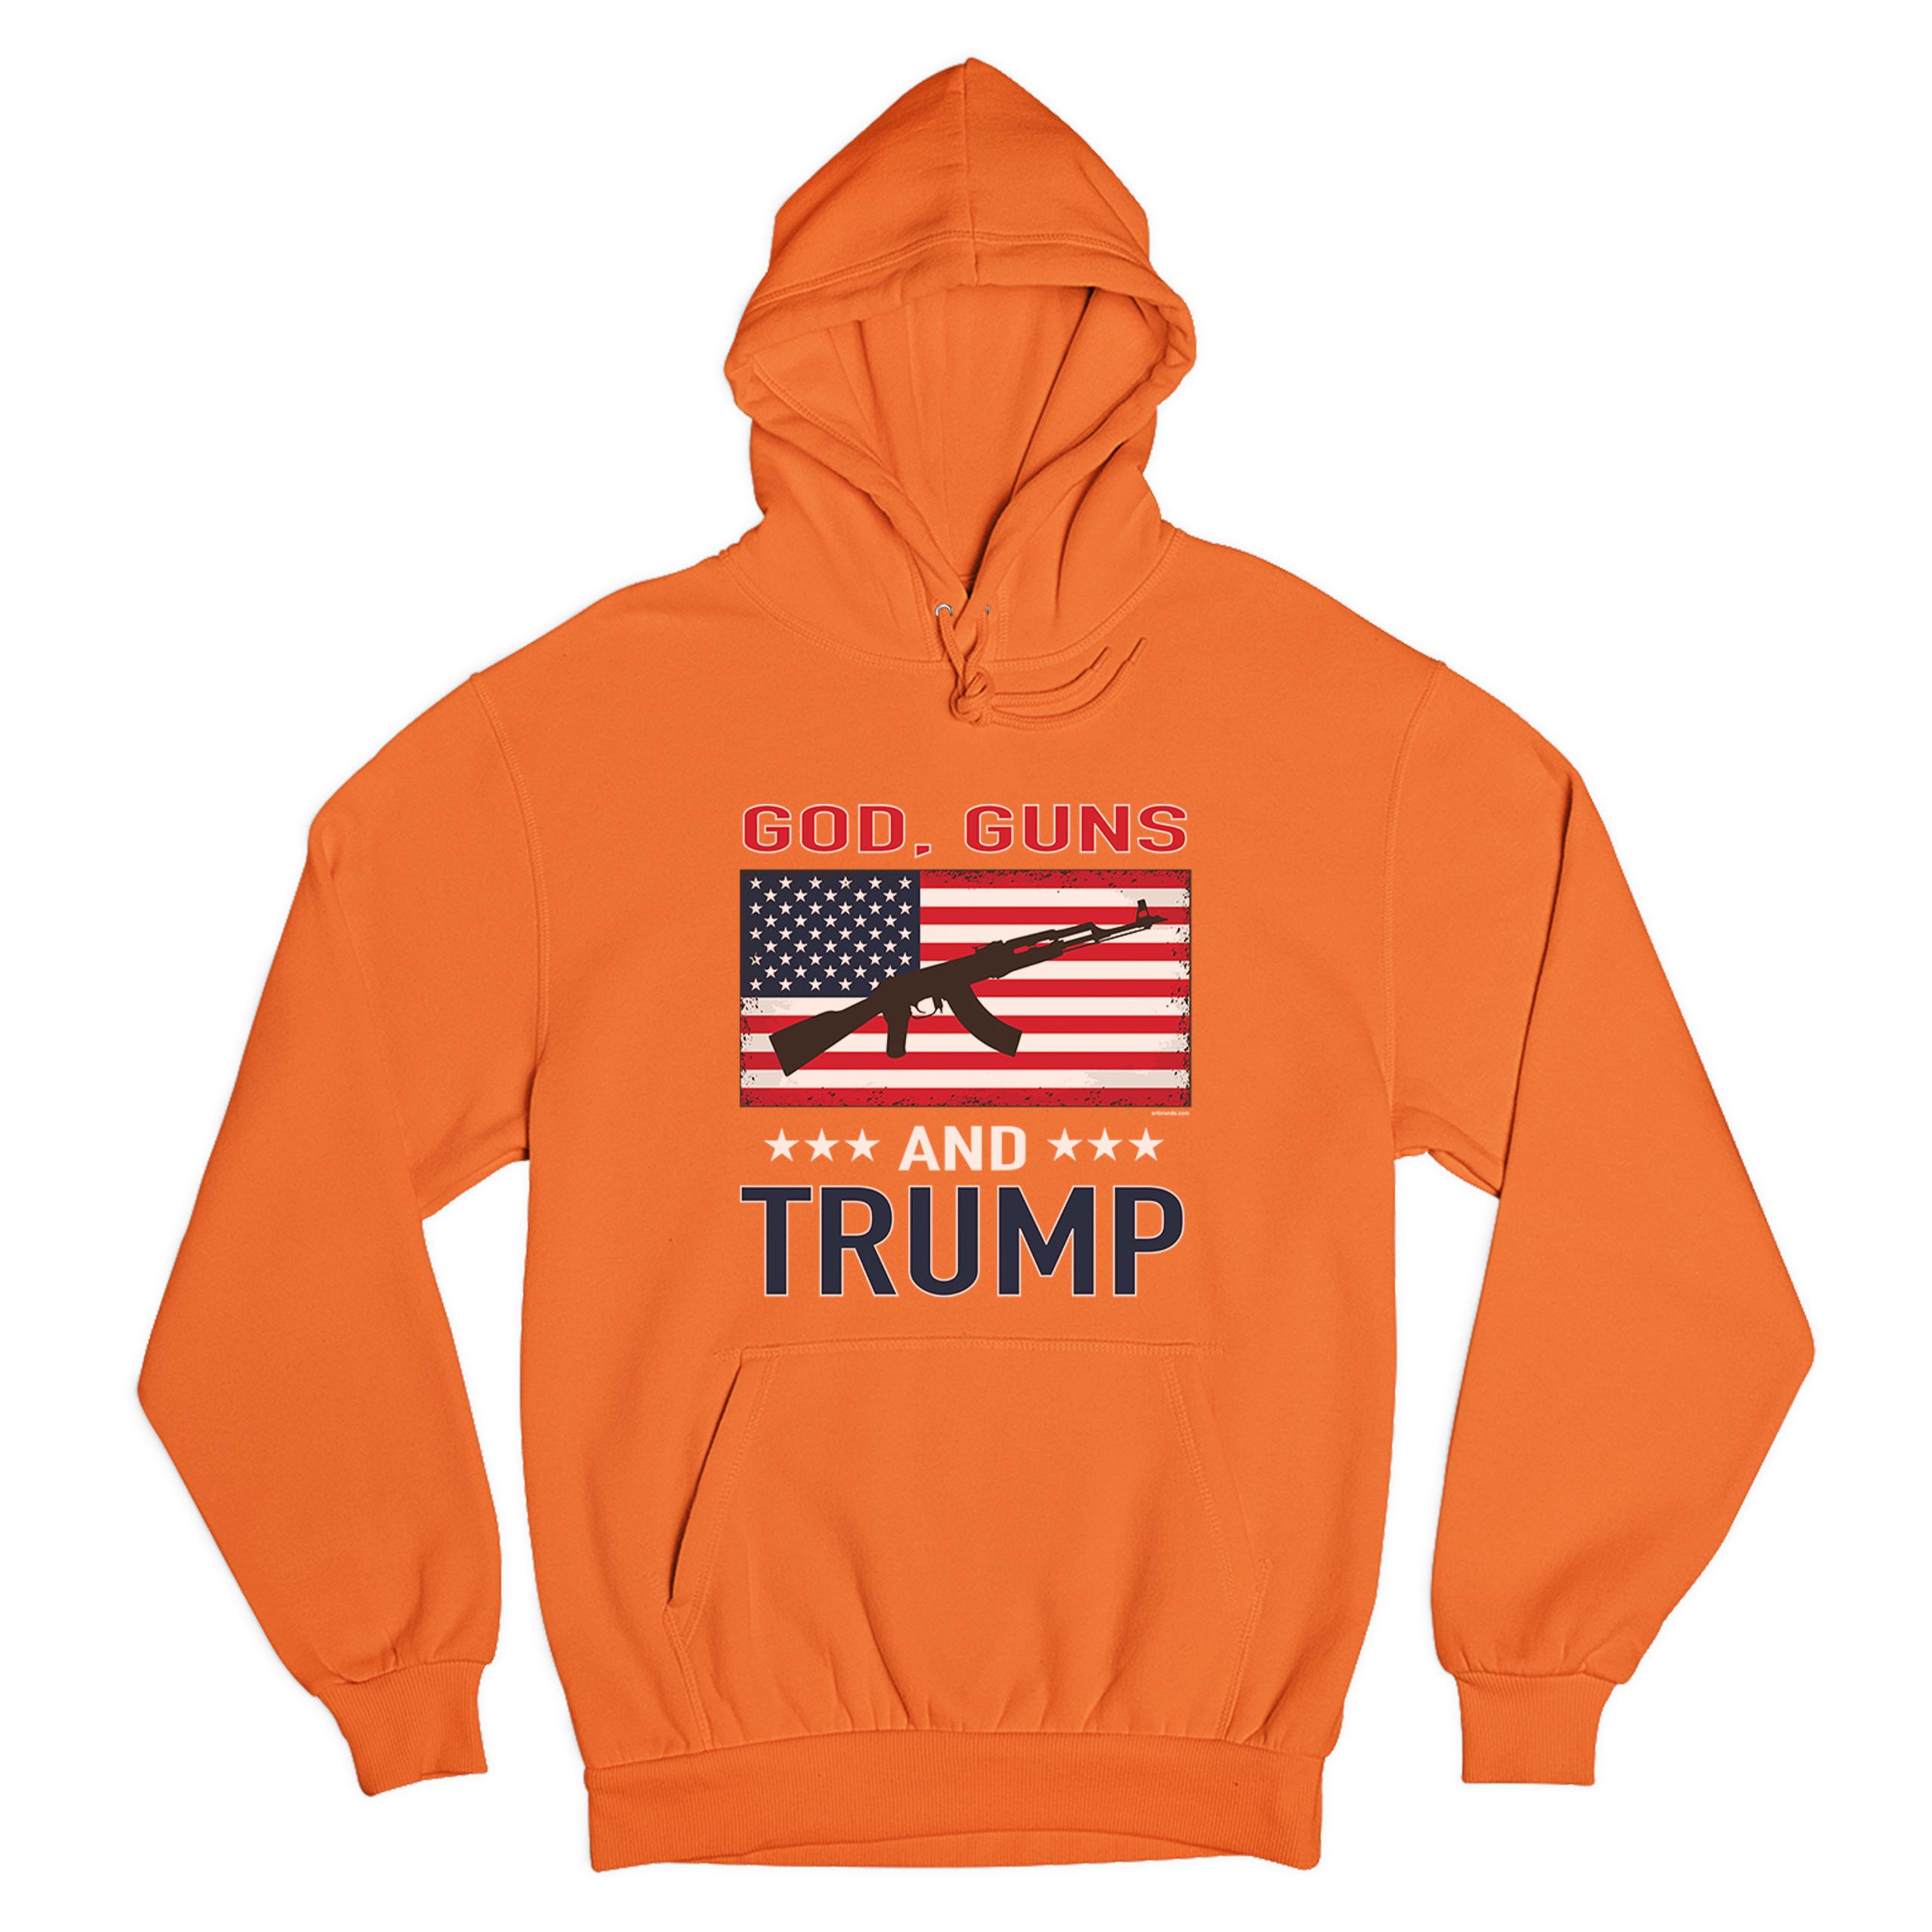 Go All Out Adult Trump 2020 Re-Elect Donald Trump Sweatshirt Hoodie 